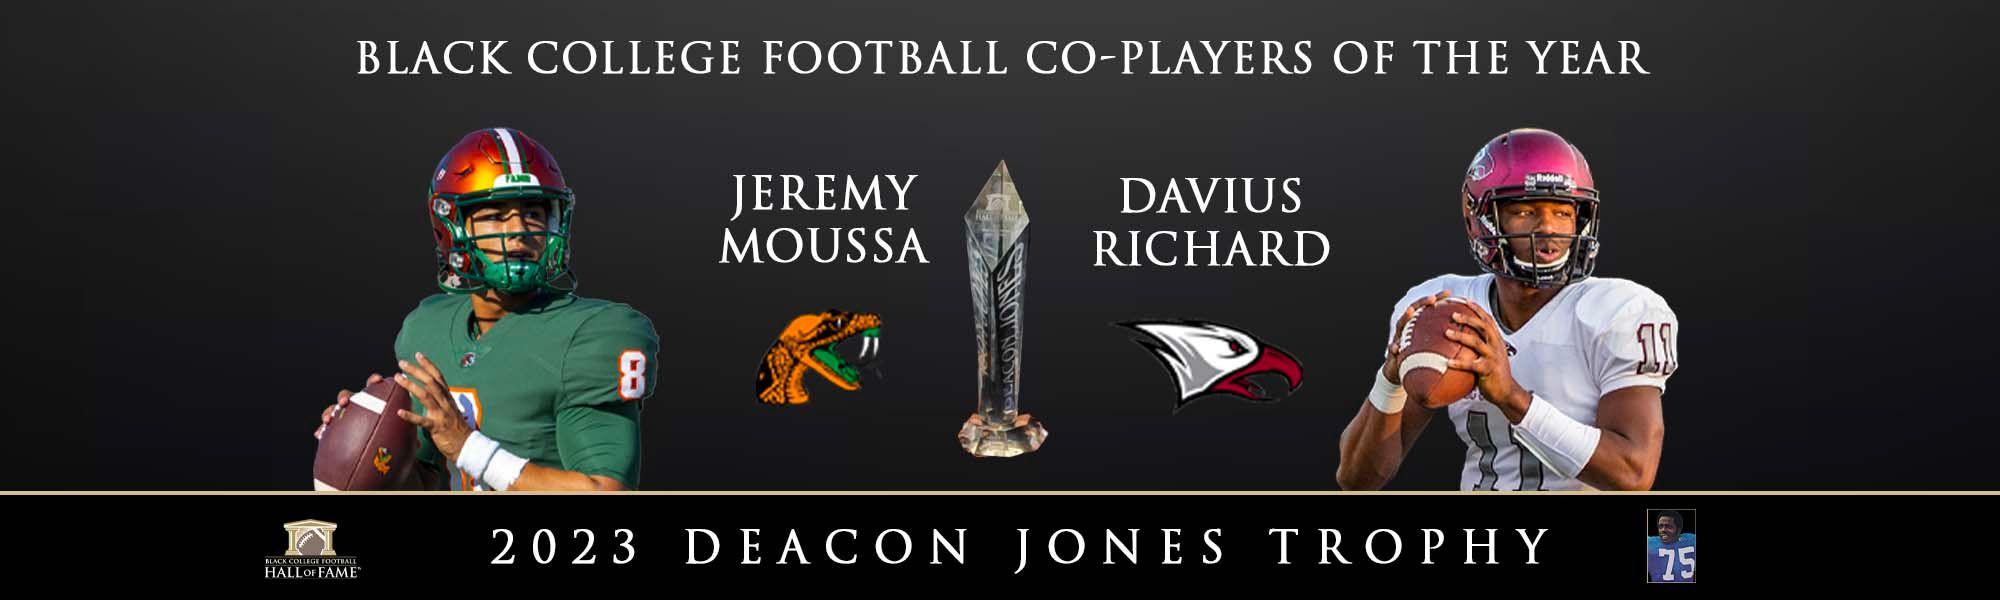 Florida A&M’s Jeremy Moussa and North Carolina Central's Davius Richard Named 2023 Black College Football Co-Players Of The Year